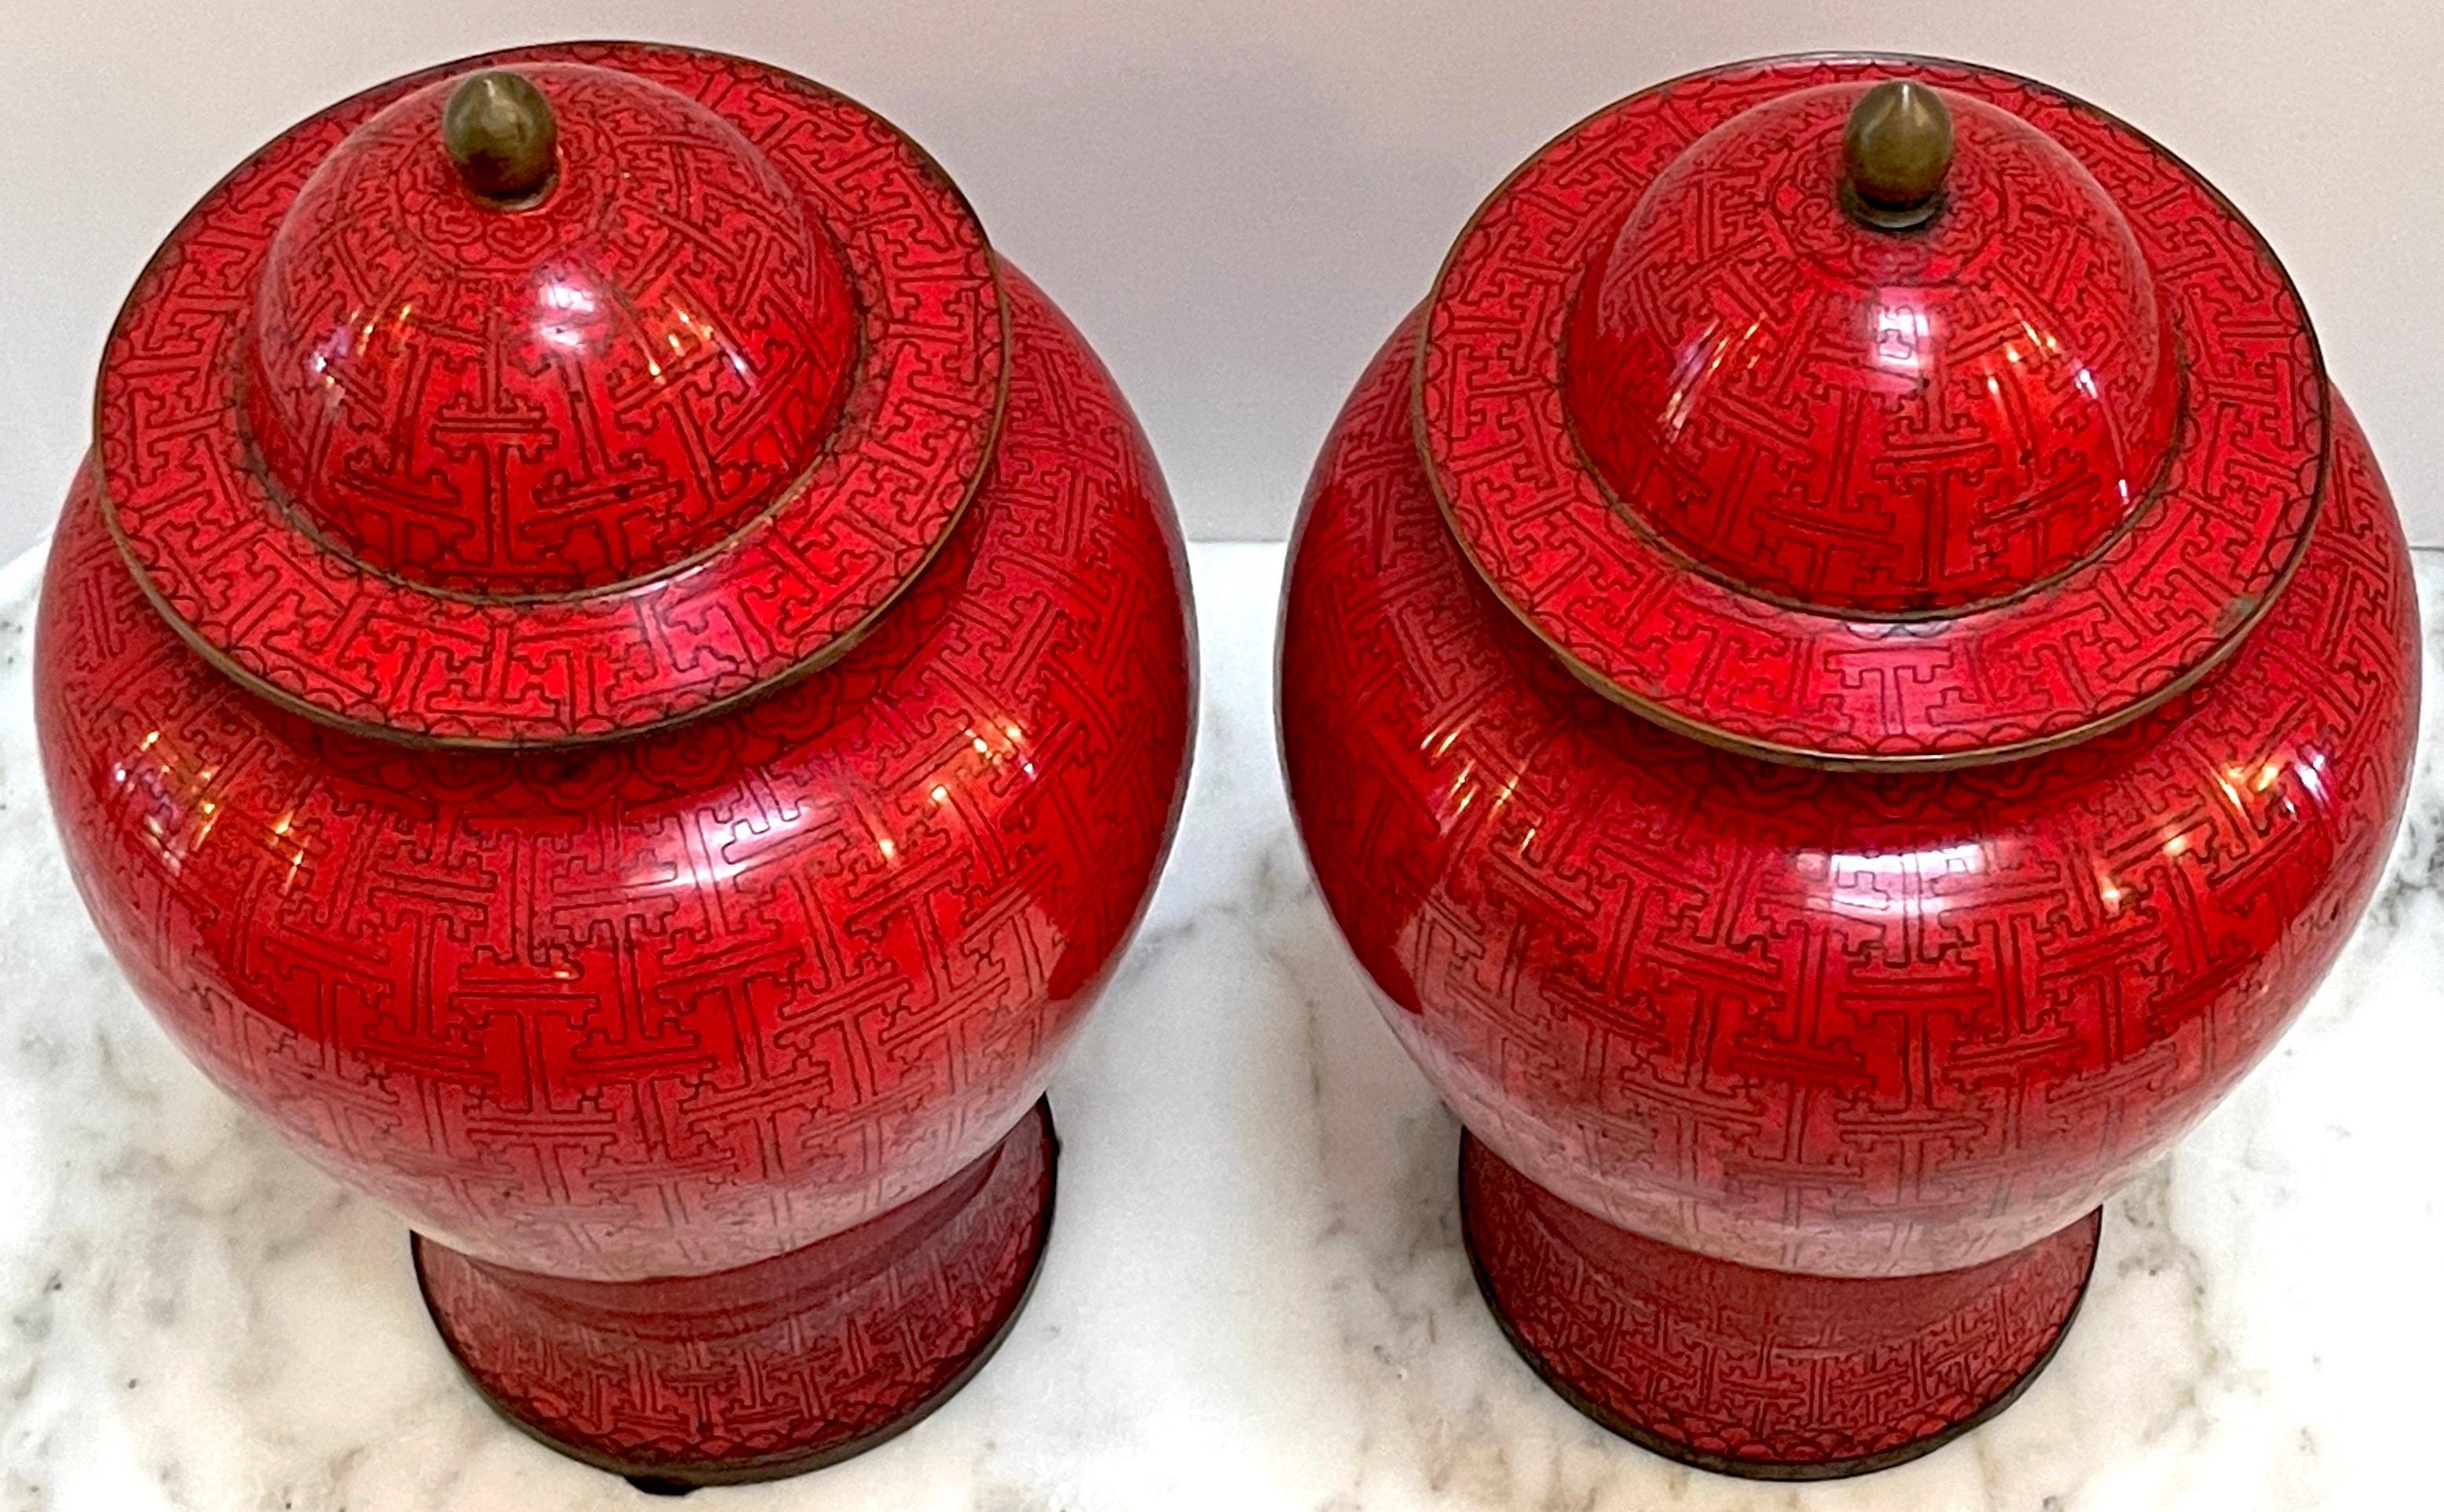 Pair of Chinese Modernist Red Cloisonné Ginger Jars and Stands, Circa 1960s   In Good Condition For Sale In West Palm Beach, FL